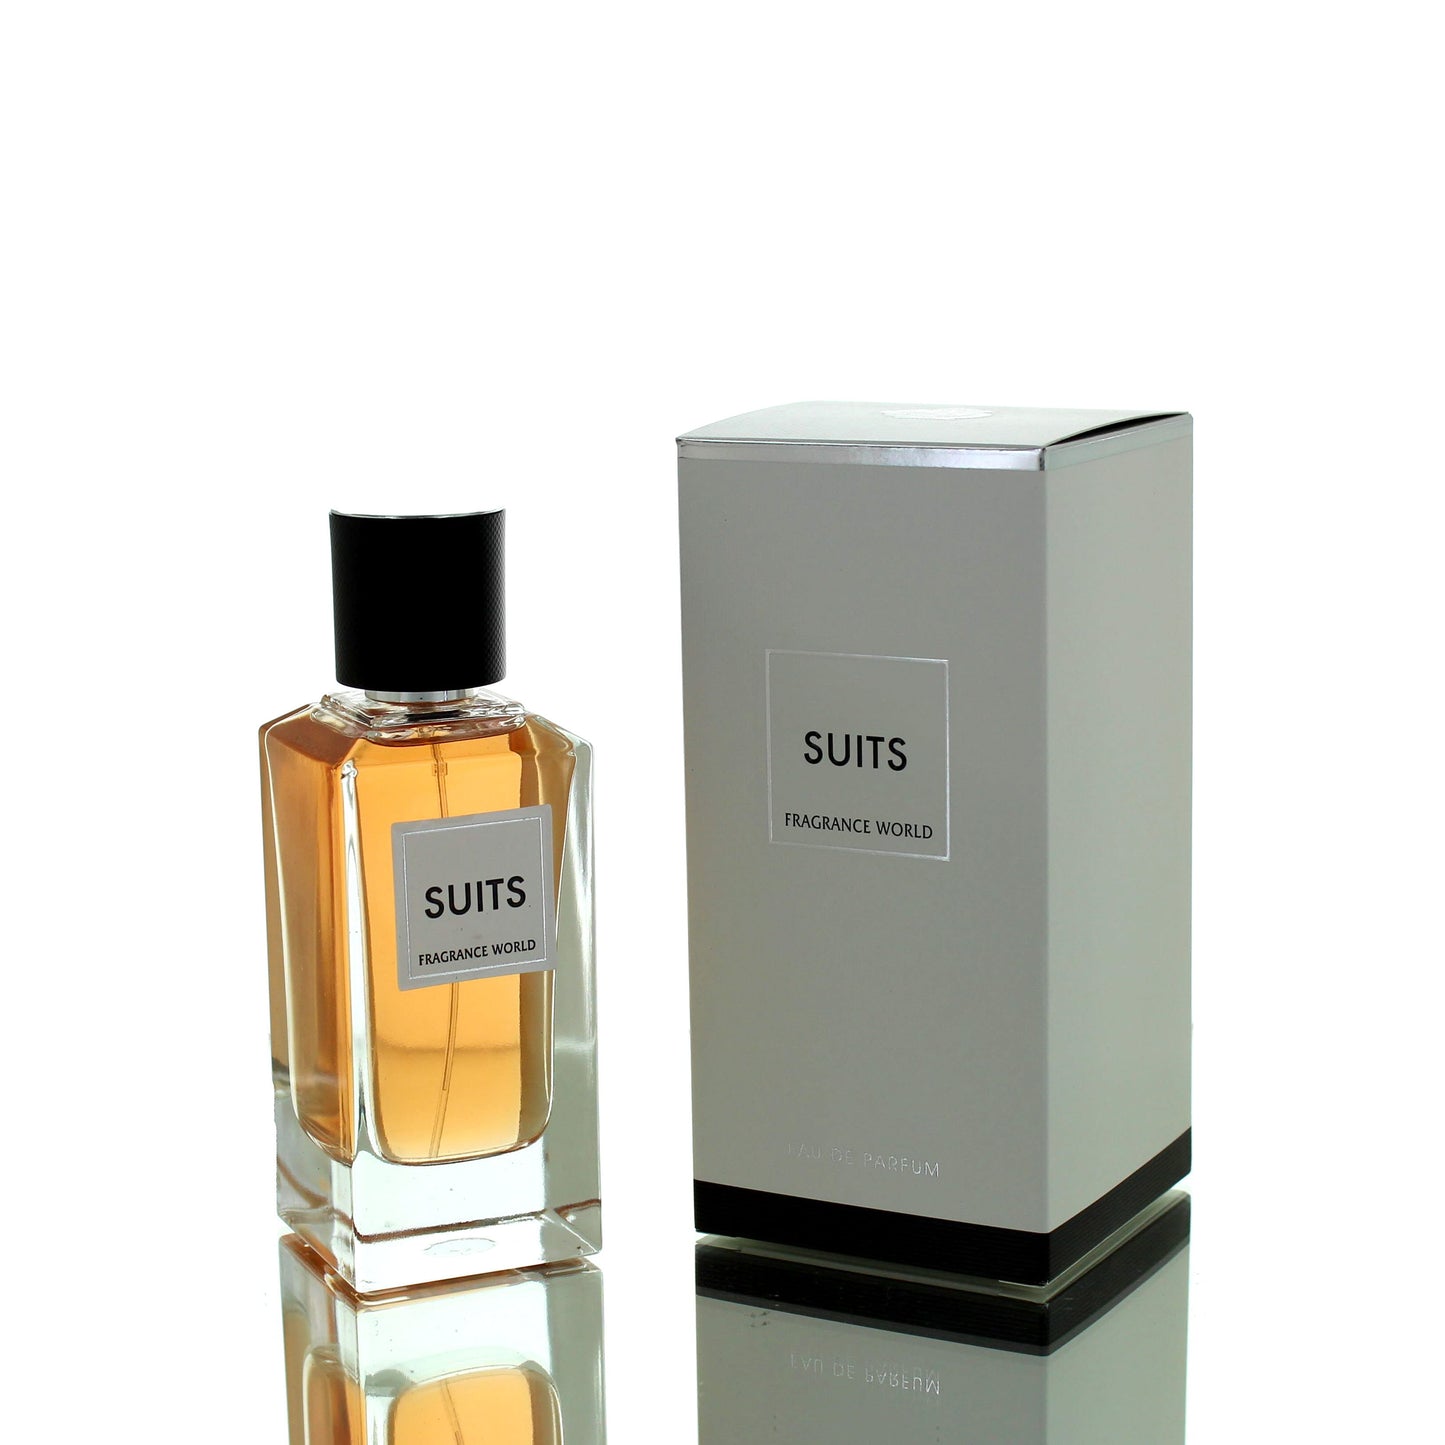 Fragrance World Suits